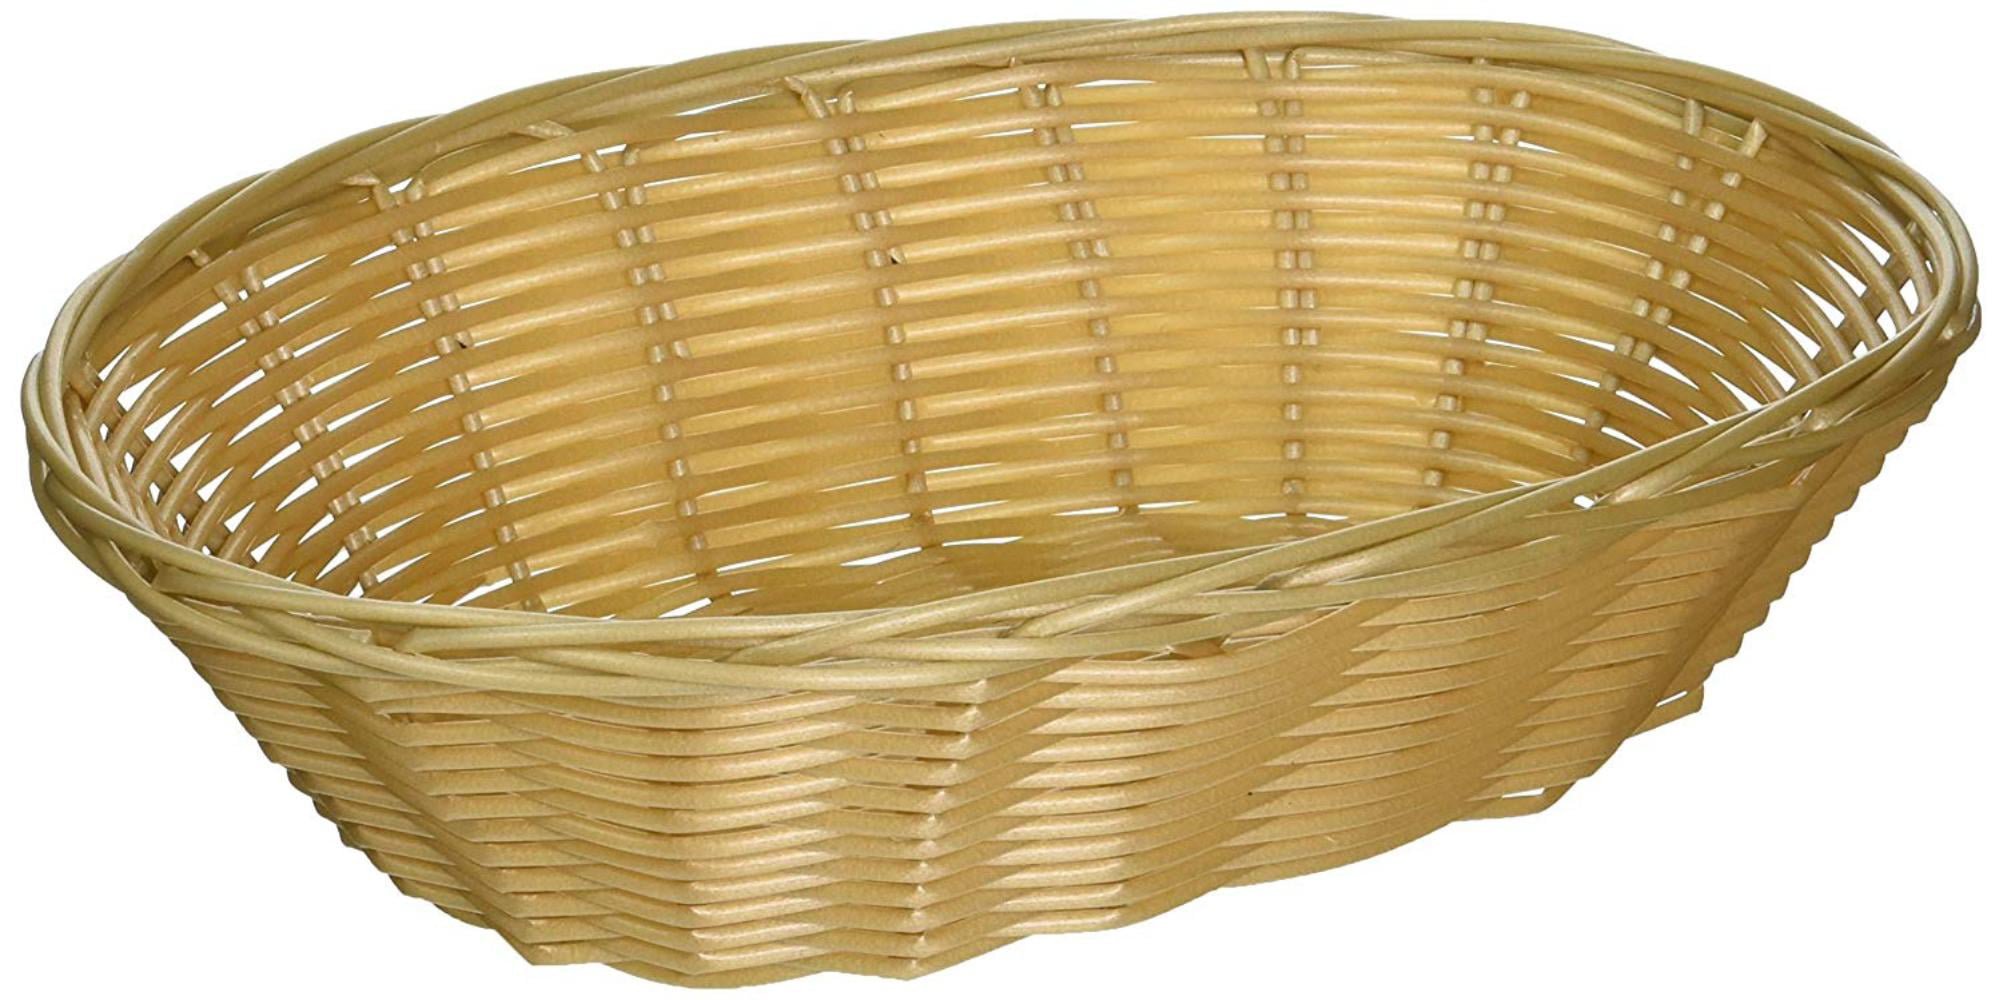 Update International Set of 12 Woven and Bread Natural Color Basket Oval for sale online 